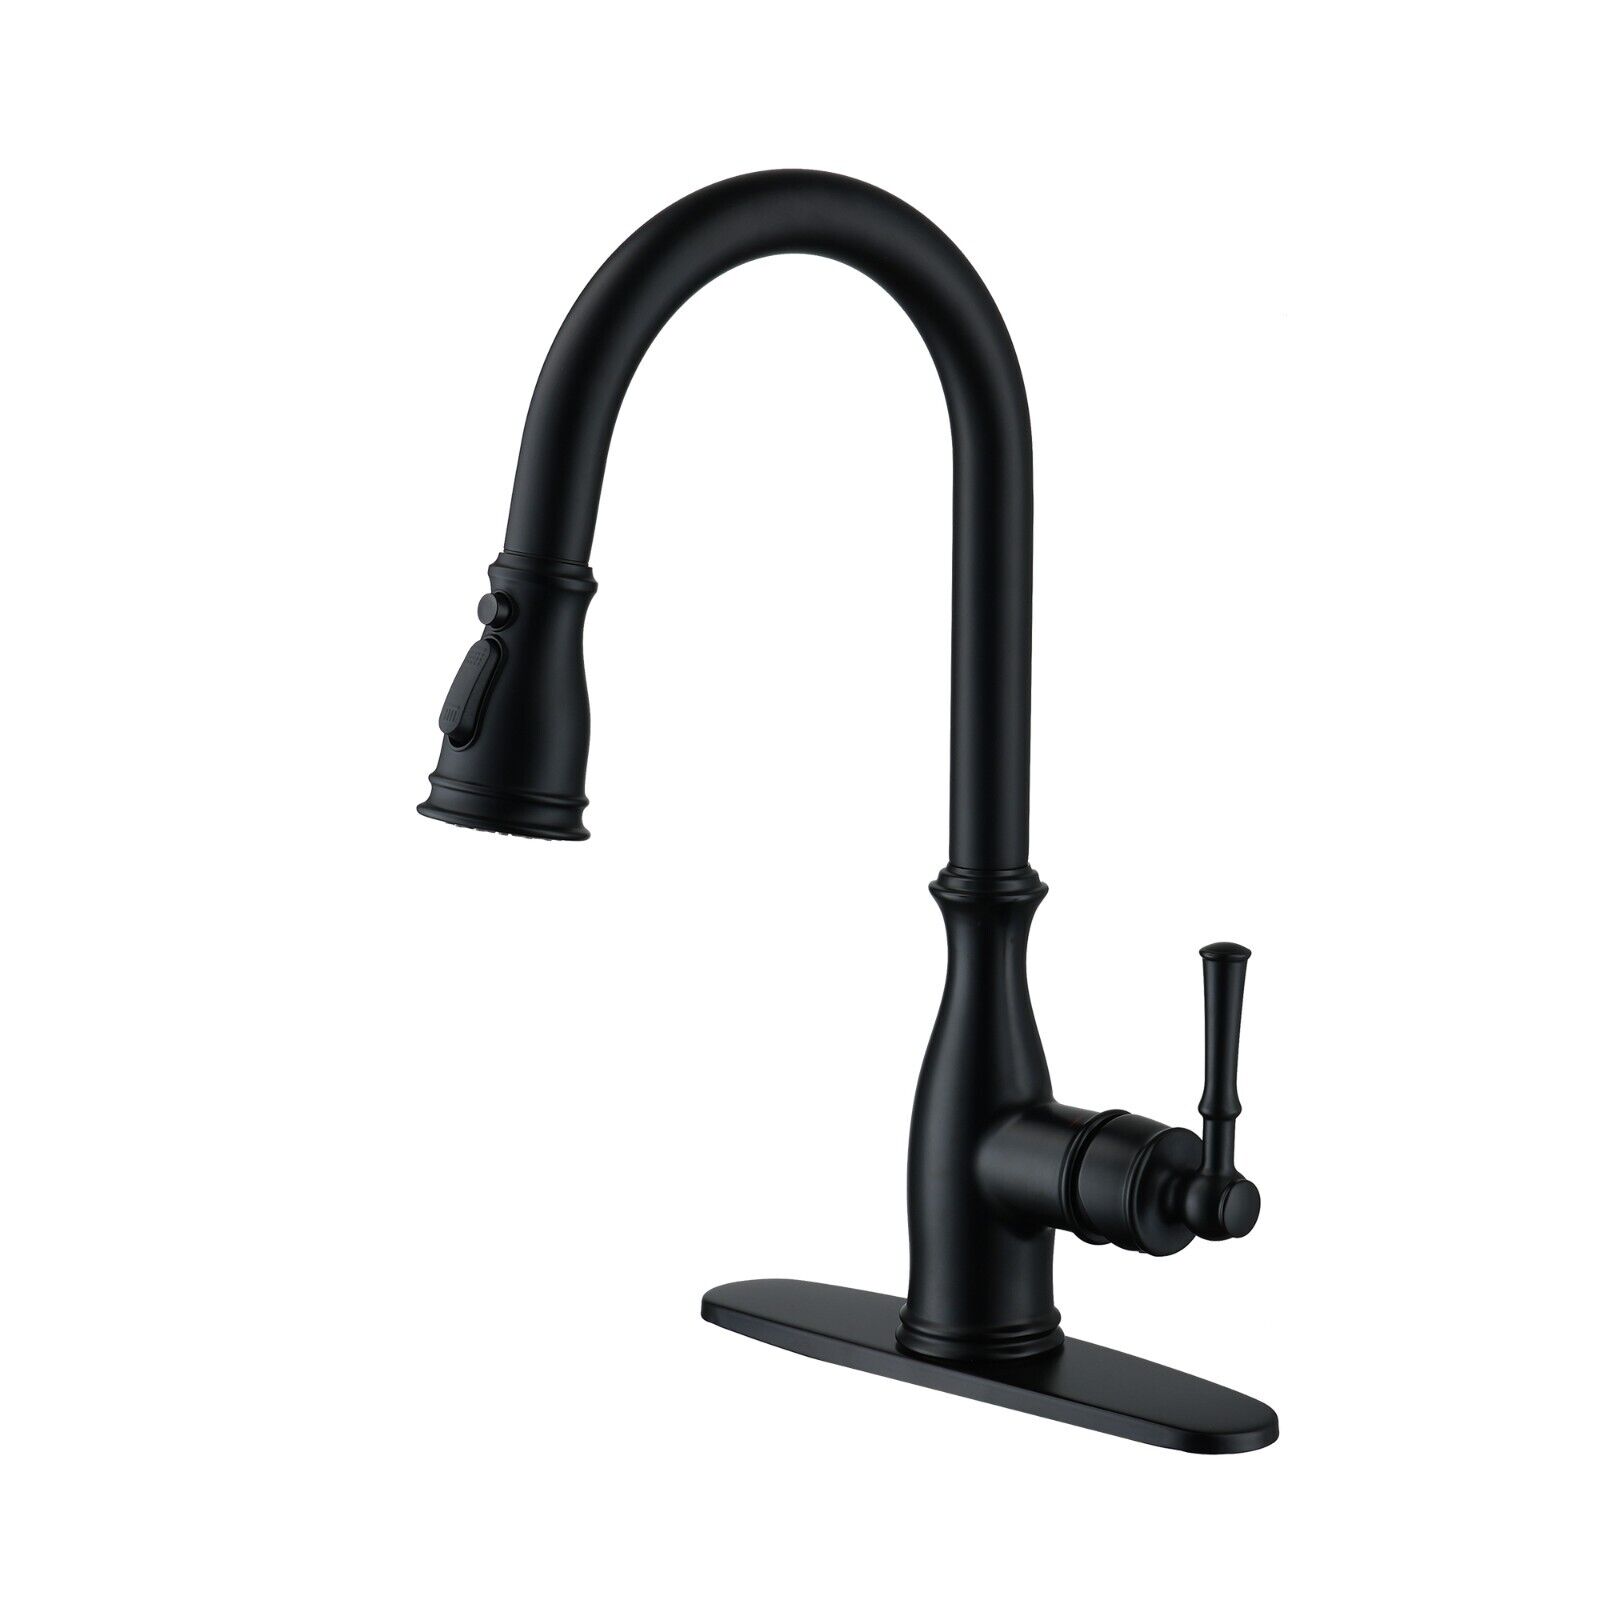 Clihome Vintage Single Handle Kitchen Faucet Pull Down Sprayer with Brush